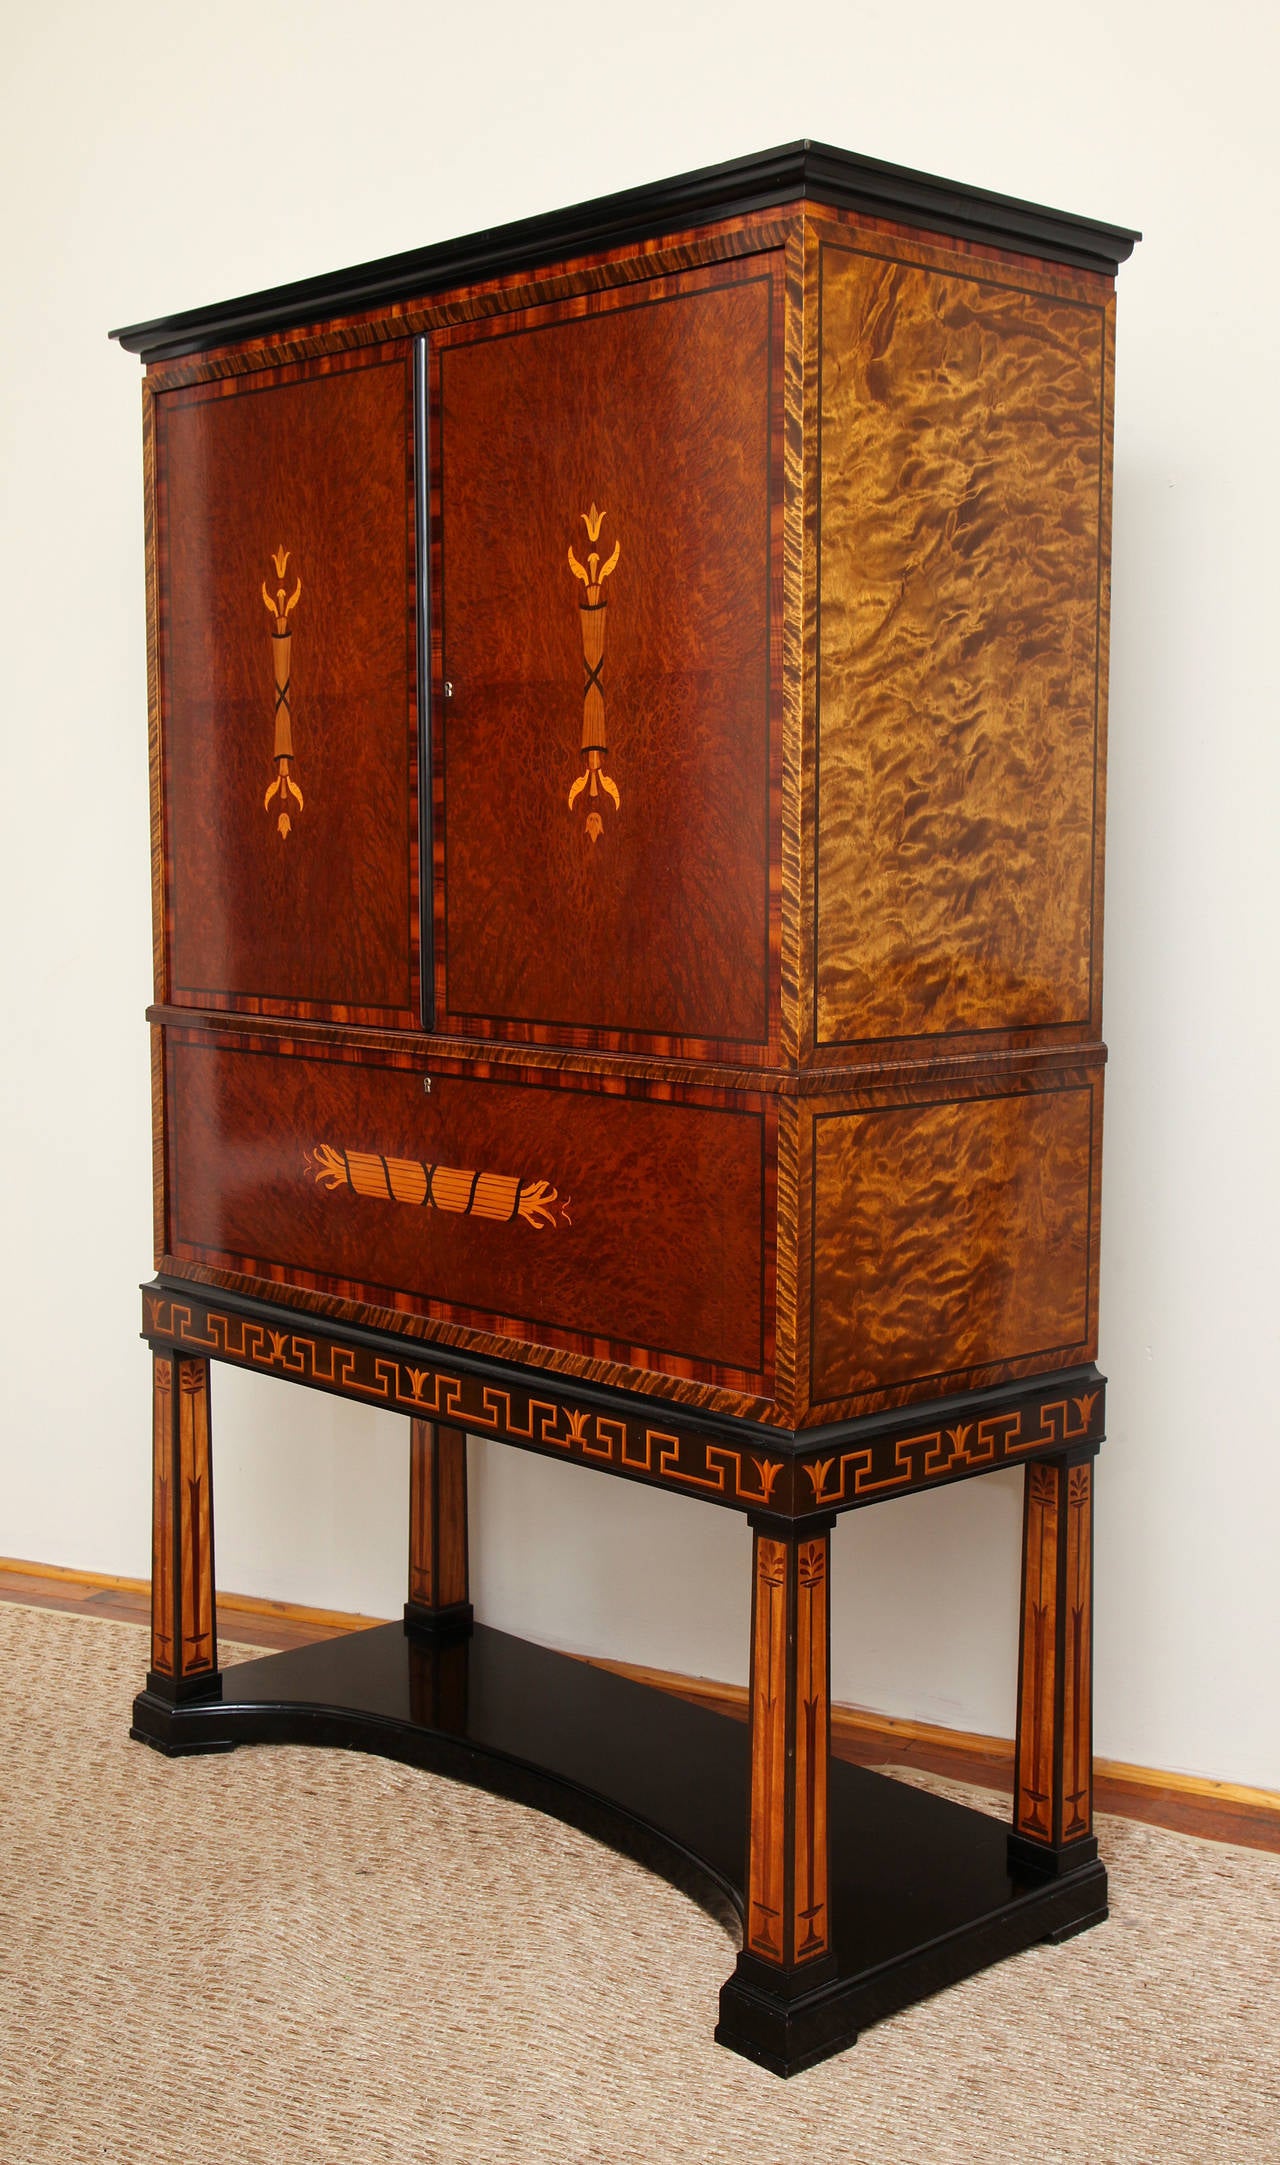 This cabinet is a stunning example of the modern classicism that led Swedish design in the 1920s and 1930s. Inlaid with vibrant timbers including birch, Macassar ebony and lemon wood and fitted with two cabinet doors with adjustable shelves over a